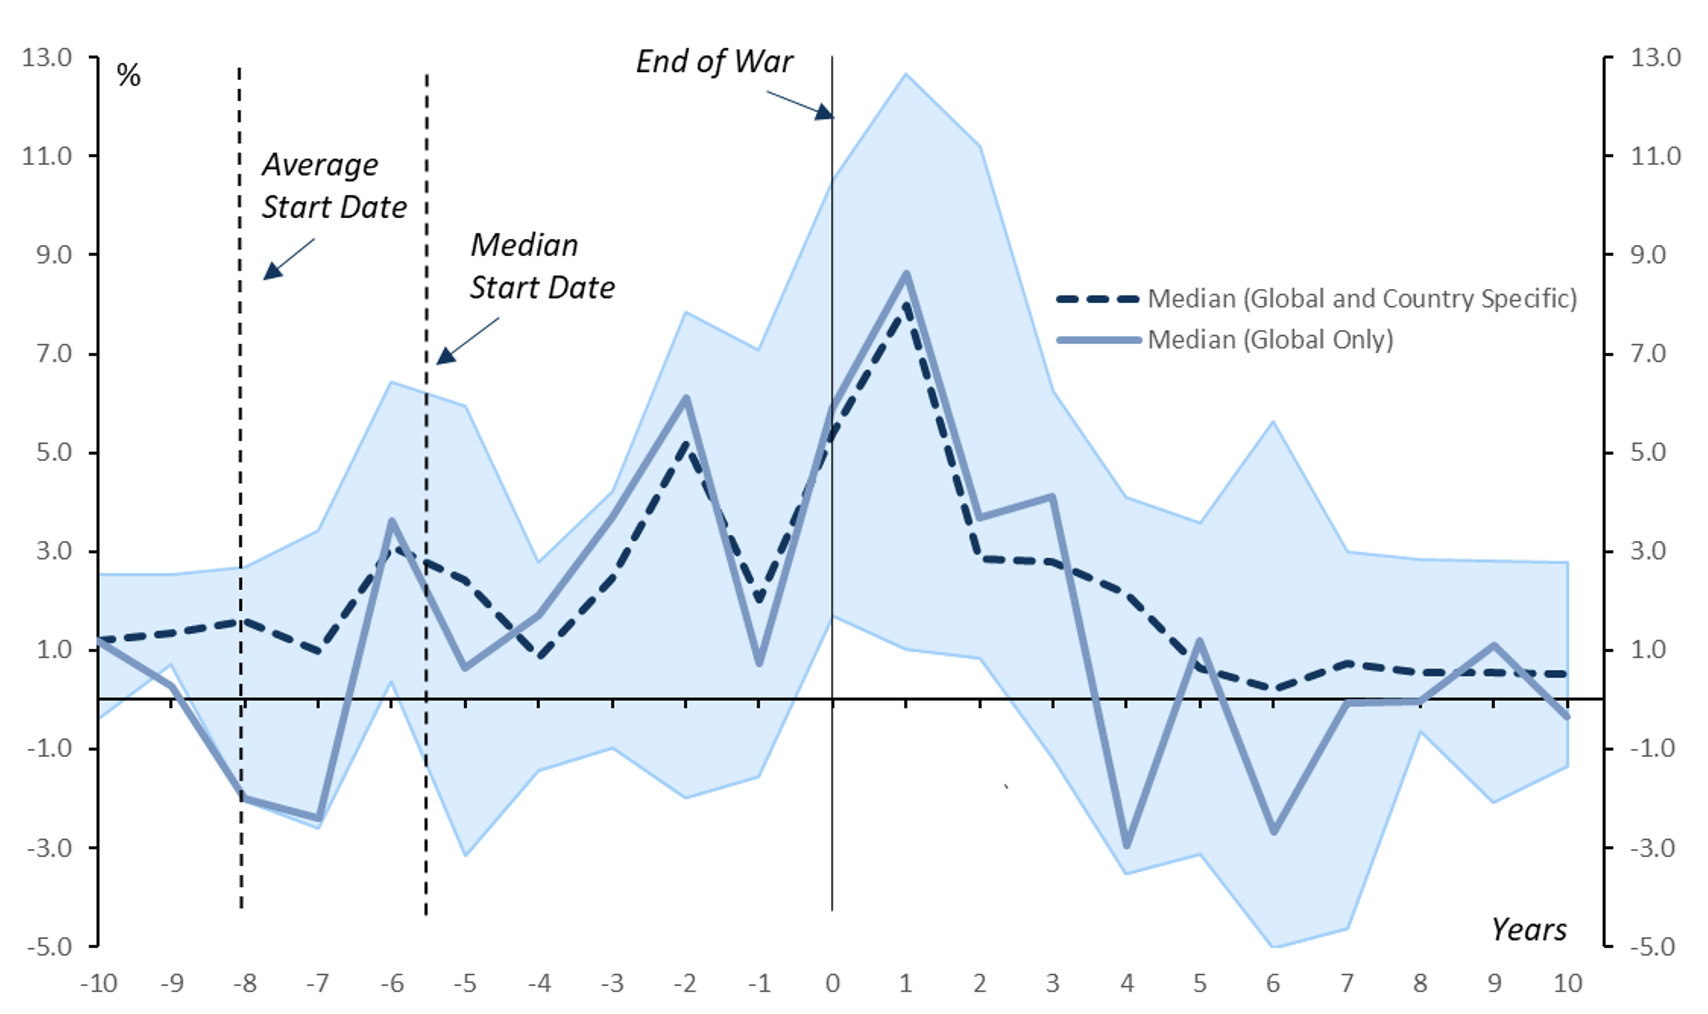 Figure 1. Inflation has Typically Risen Sharply Both During and Especially in the Aftermath of Major Wars